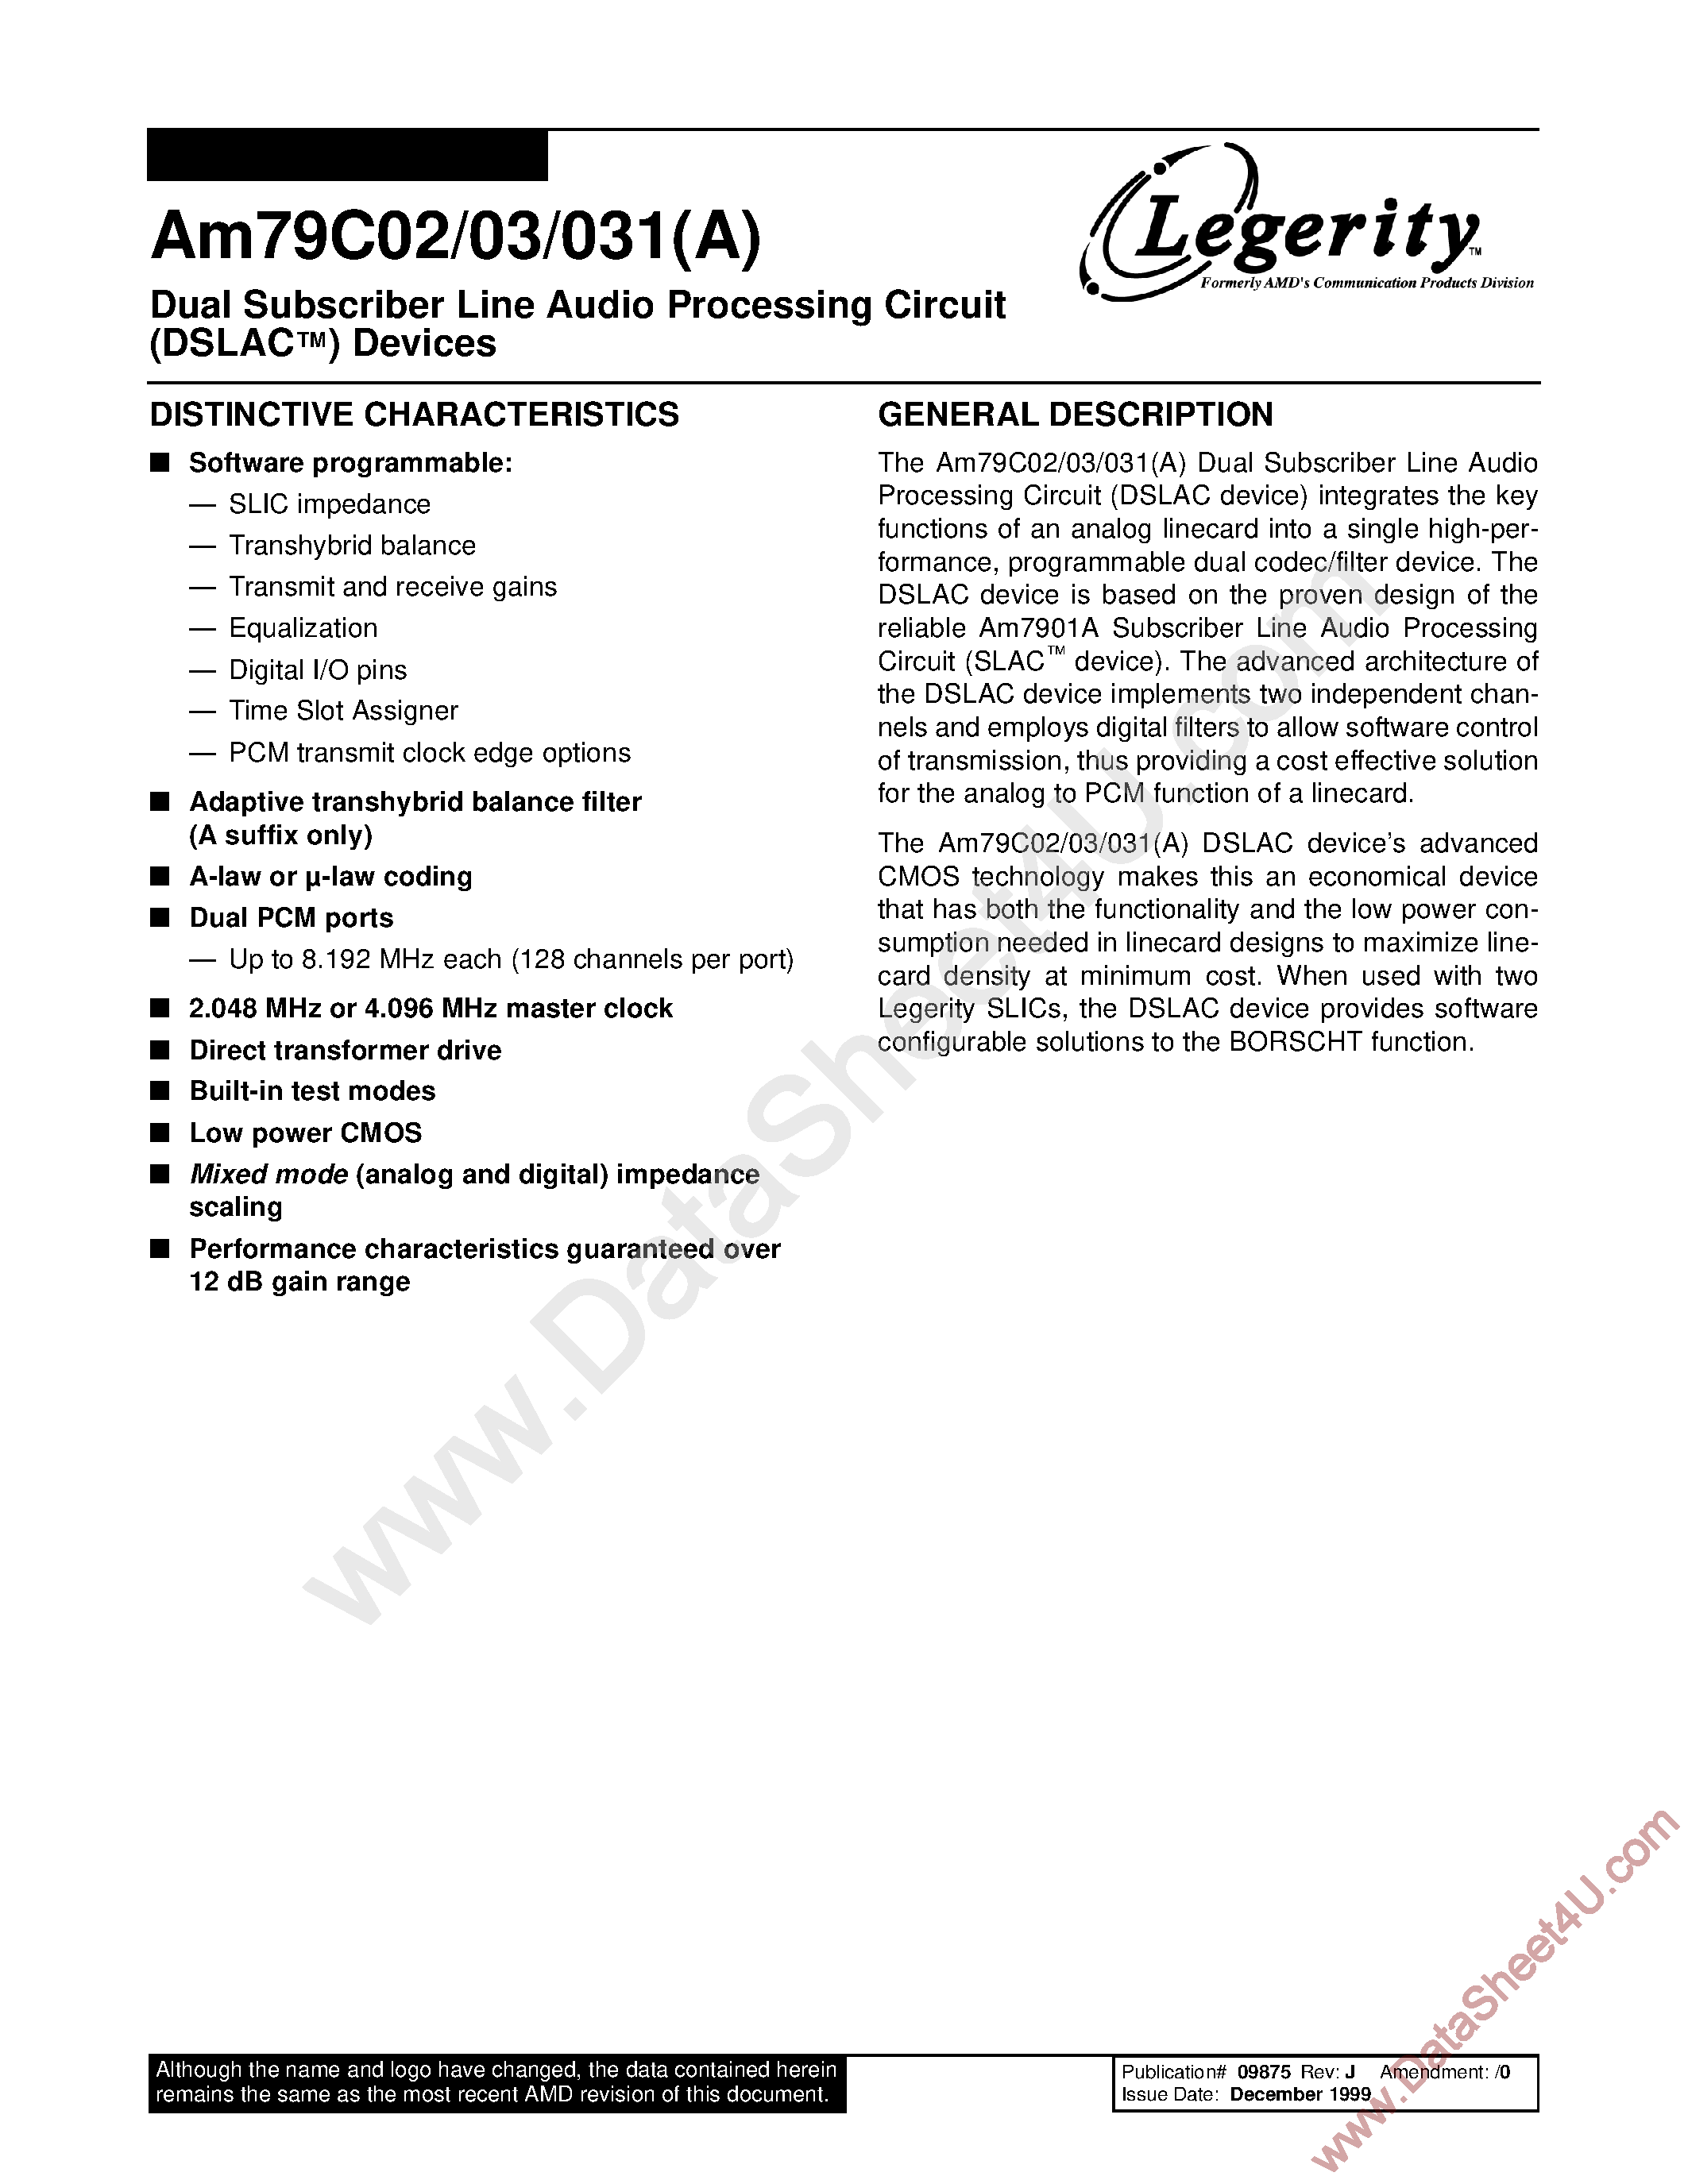 Datasheet AM79C02 - (AM79C02/03/031) Dual Subscriber Line Audio Processing Circuit Devices page 1